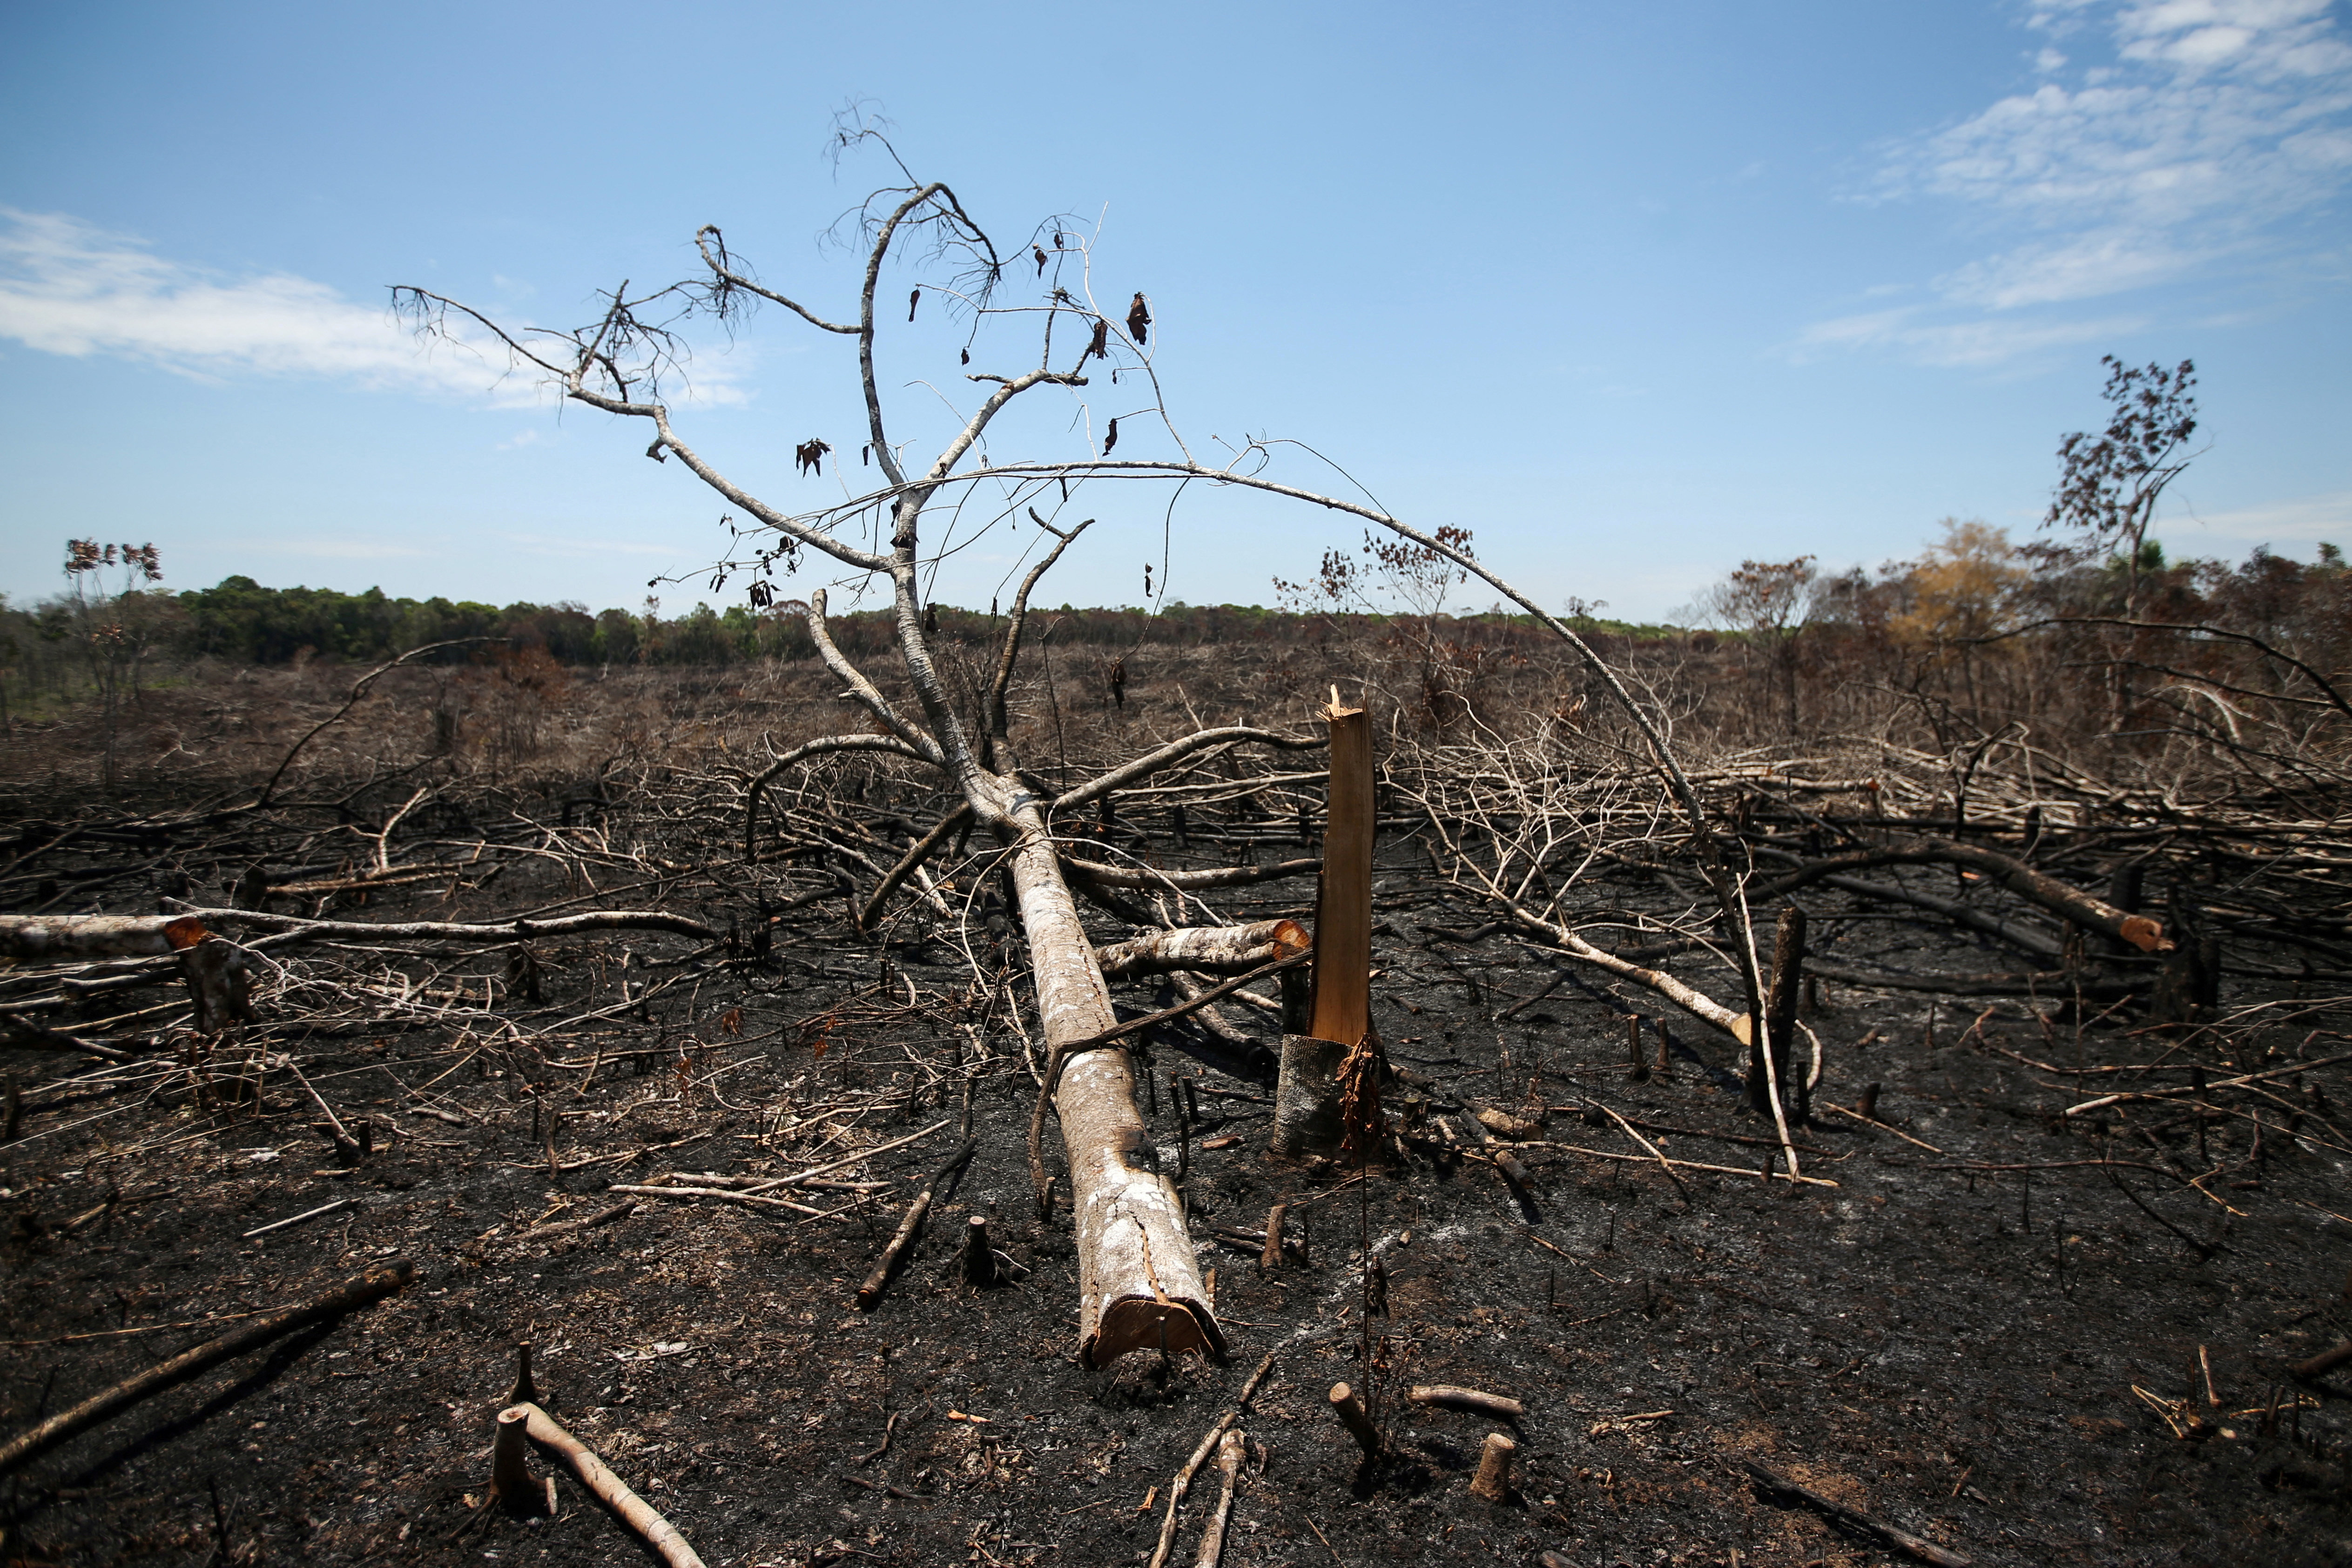 Charred logs are seen on a stretch of the Yari plains, which was recently burned for pasture, in Caqueta